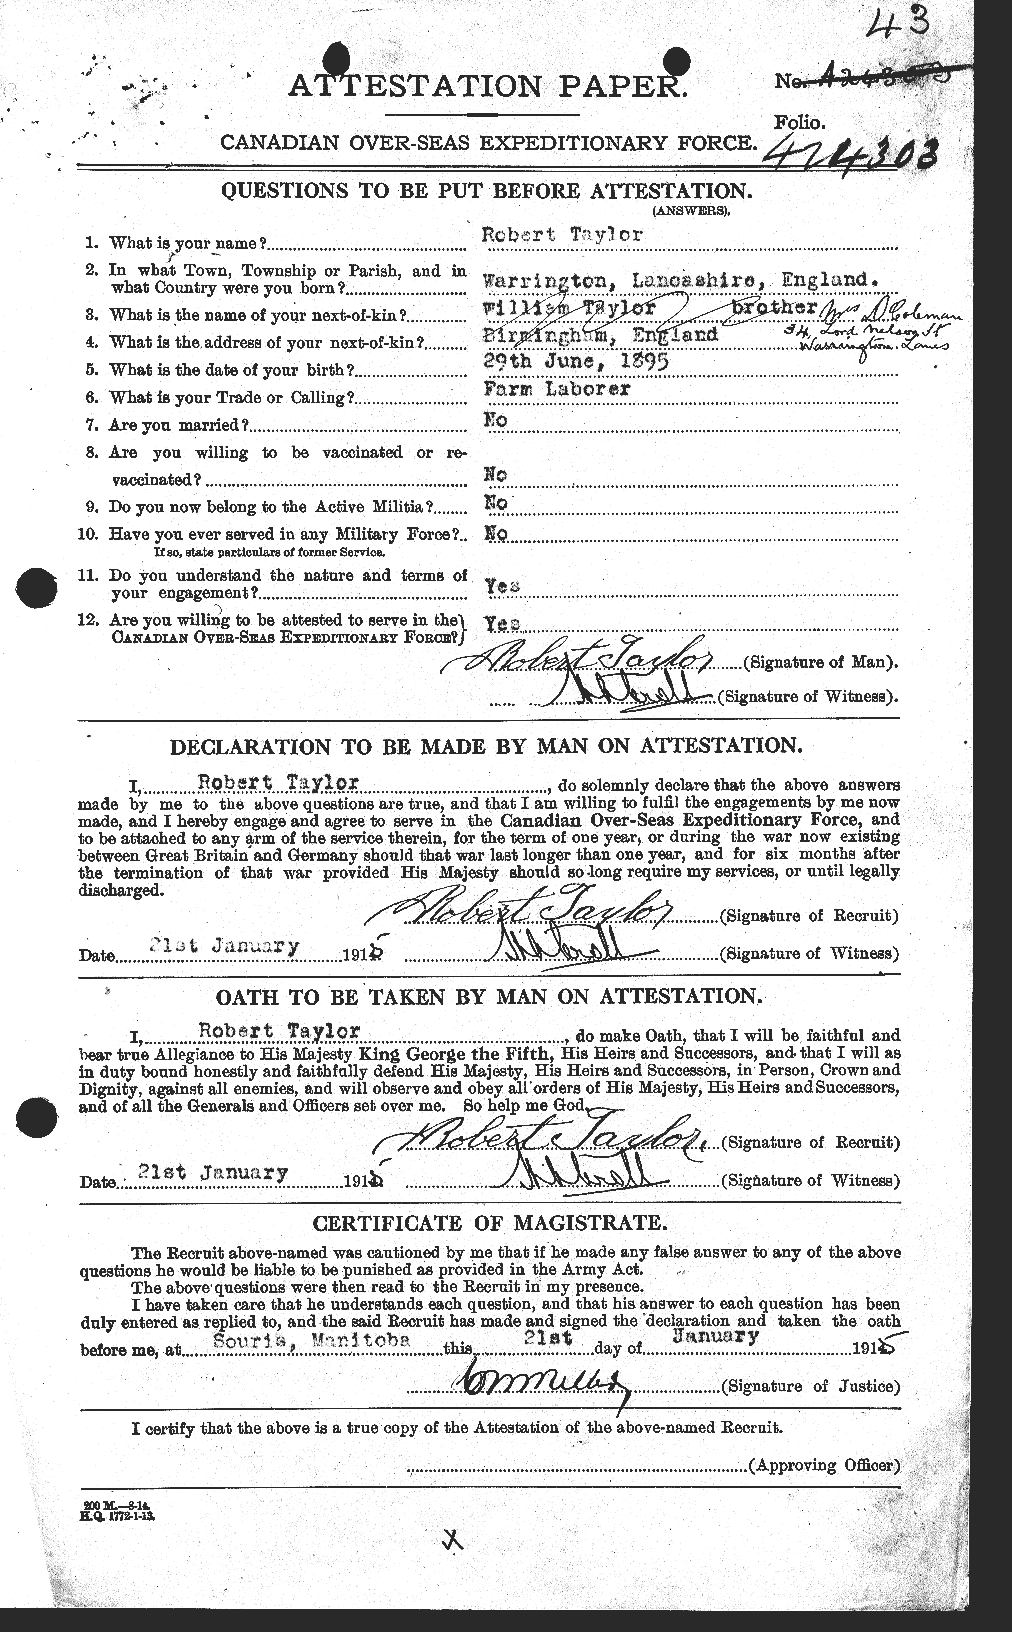 Personnel Records of the First World War - CEF 627450a